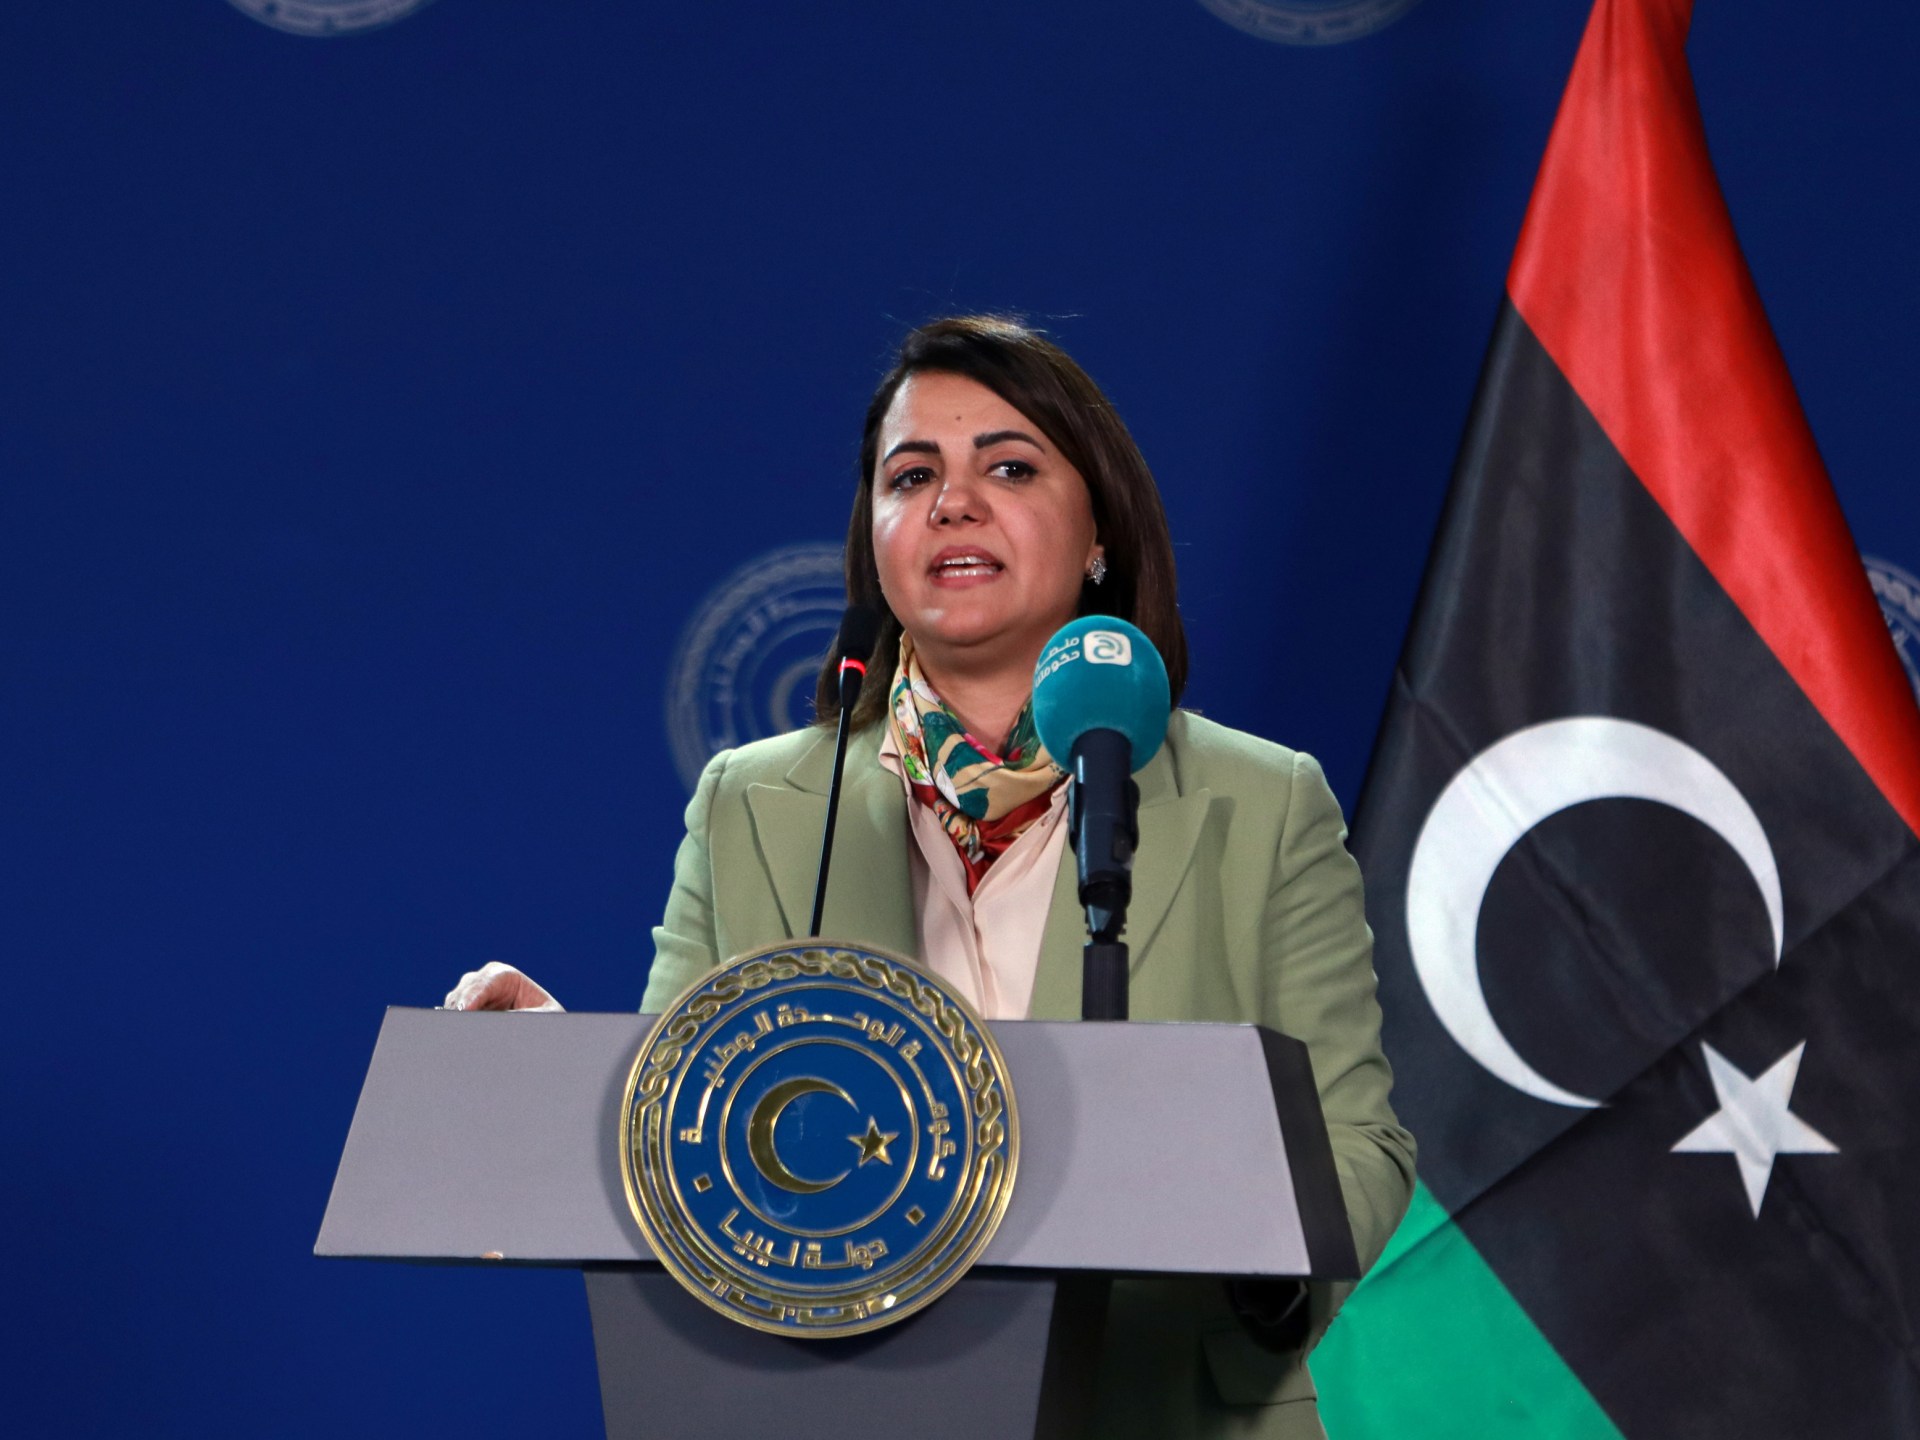 News that Libyan Foreign Minister has left the country after revealing his meeting with Israeli Foreign Minister |  news